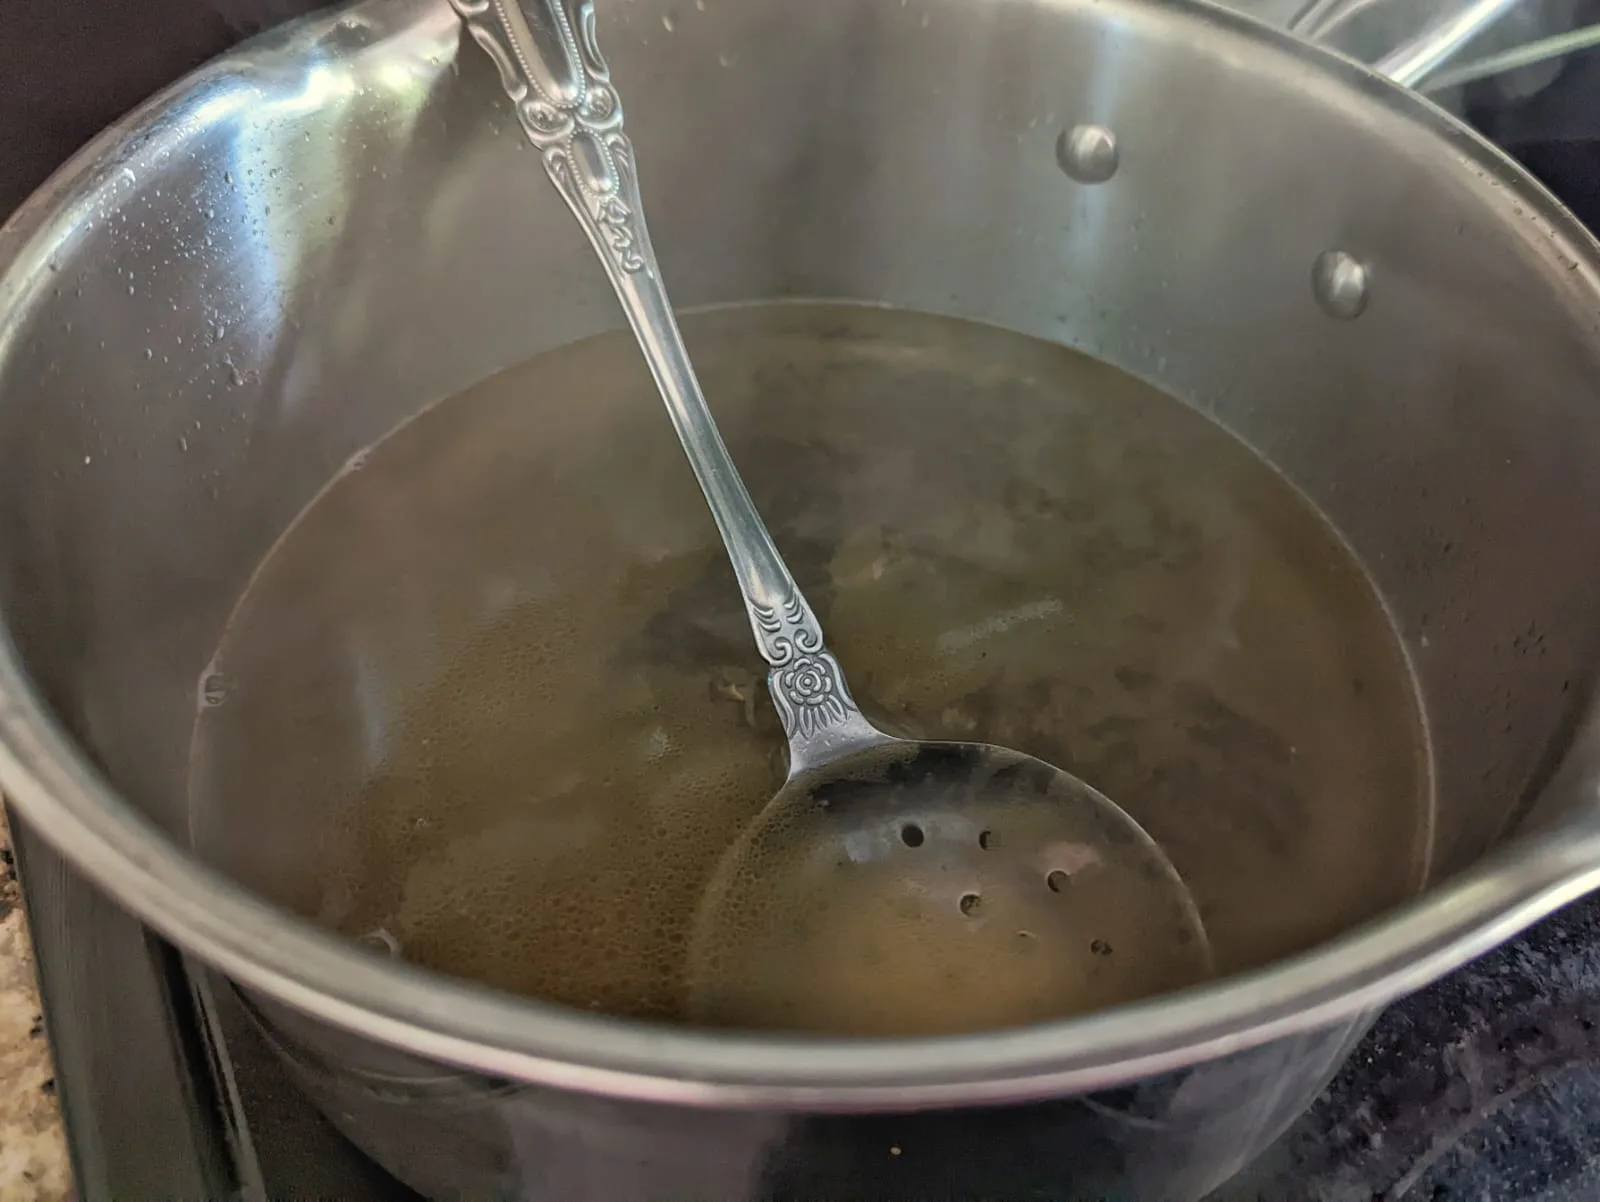 Shrimp stock boiling in a sauce pan.